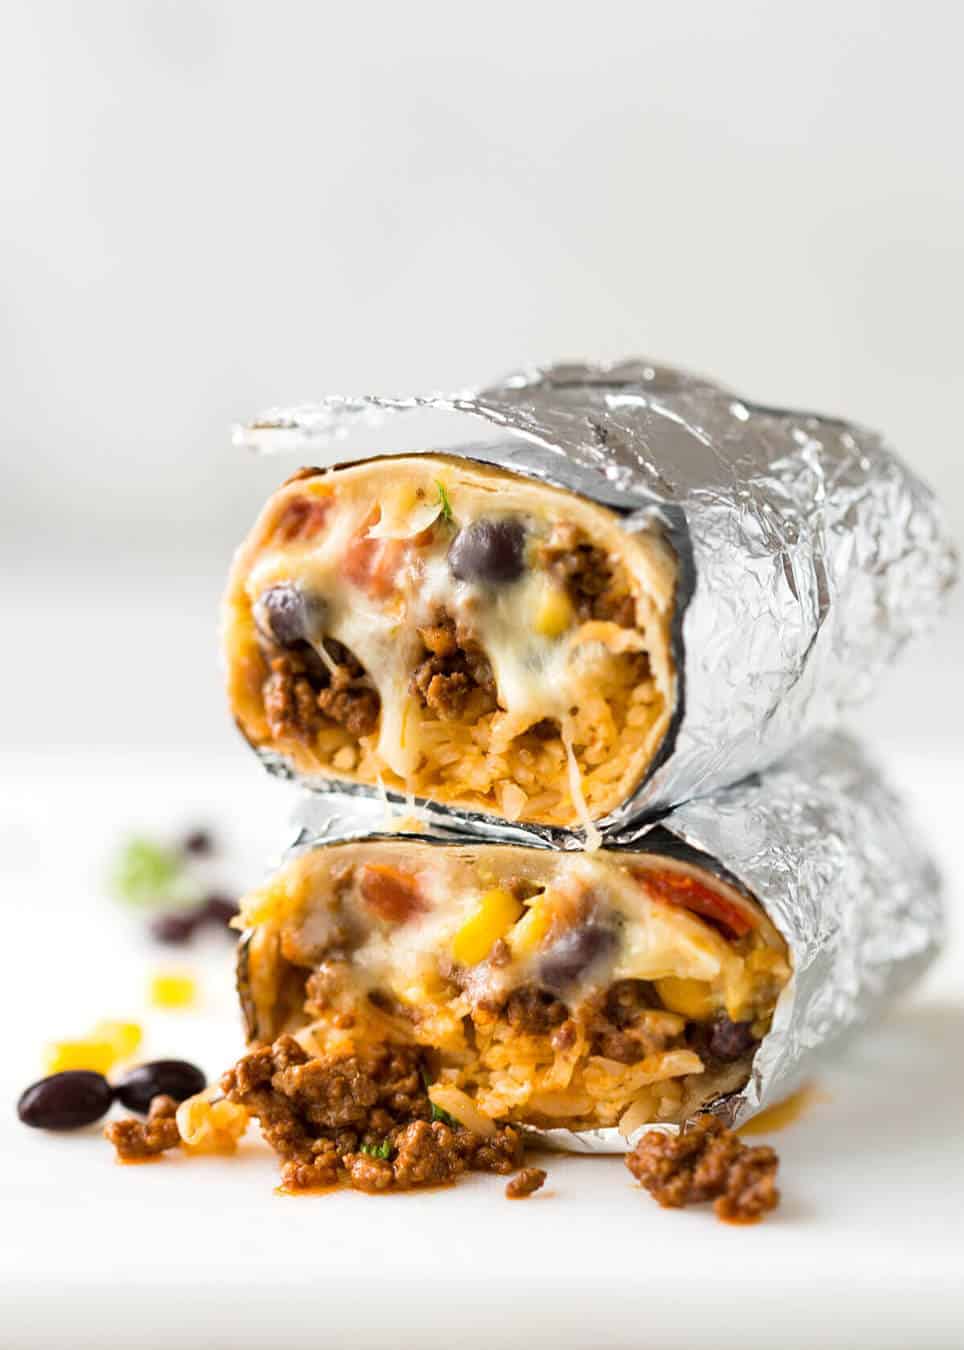 A great everyday Beef Burrito, made with super tasty seasoned beef filling. Fresh and freezable versions! www.recipetineats.com